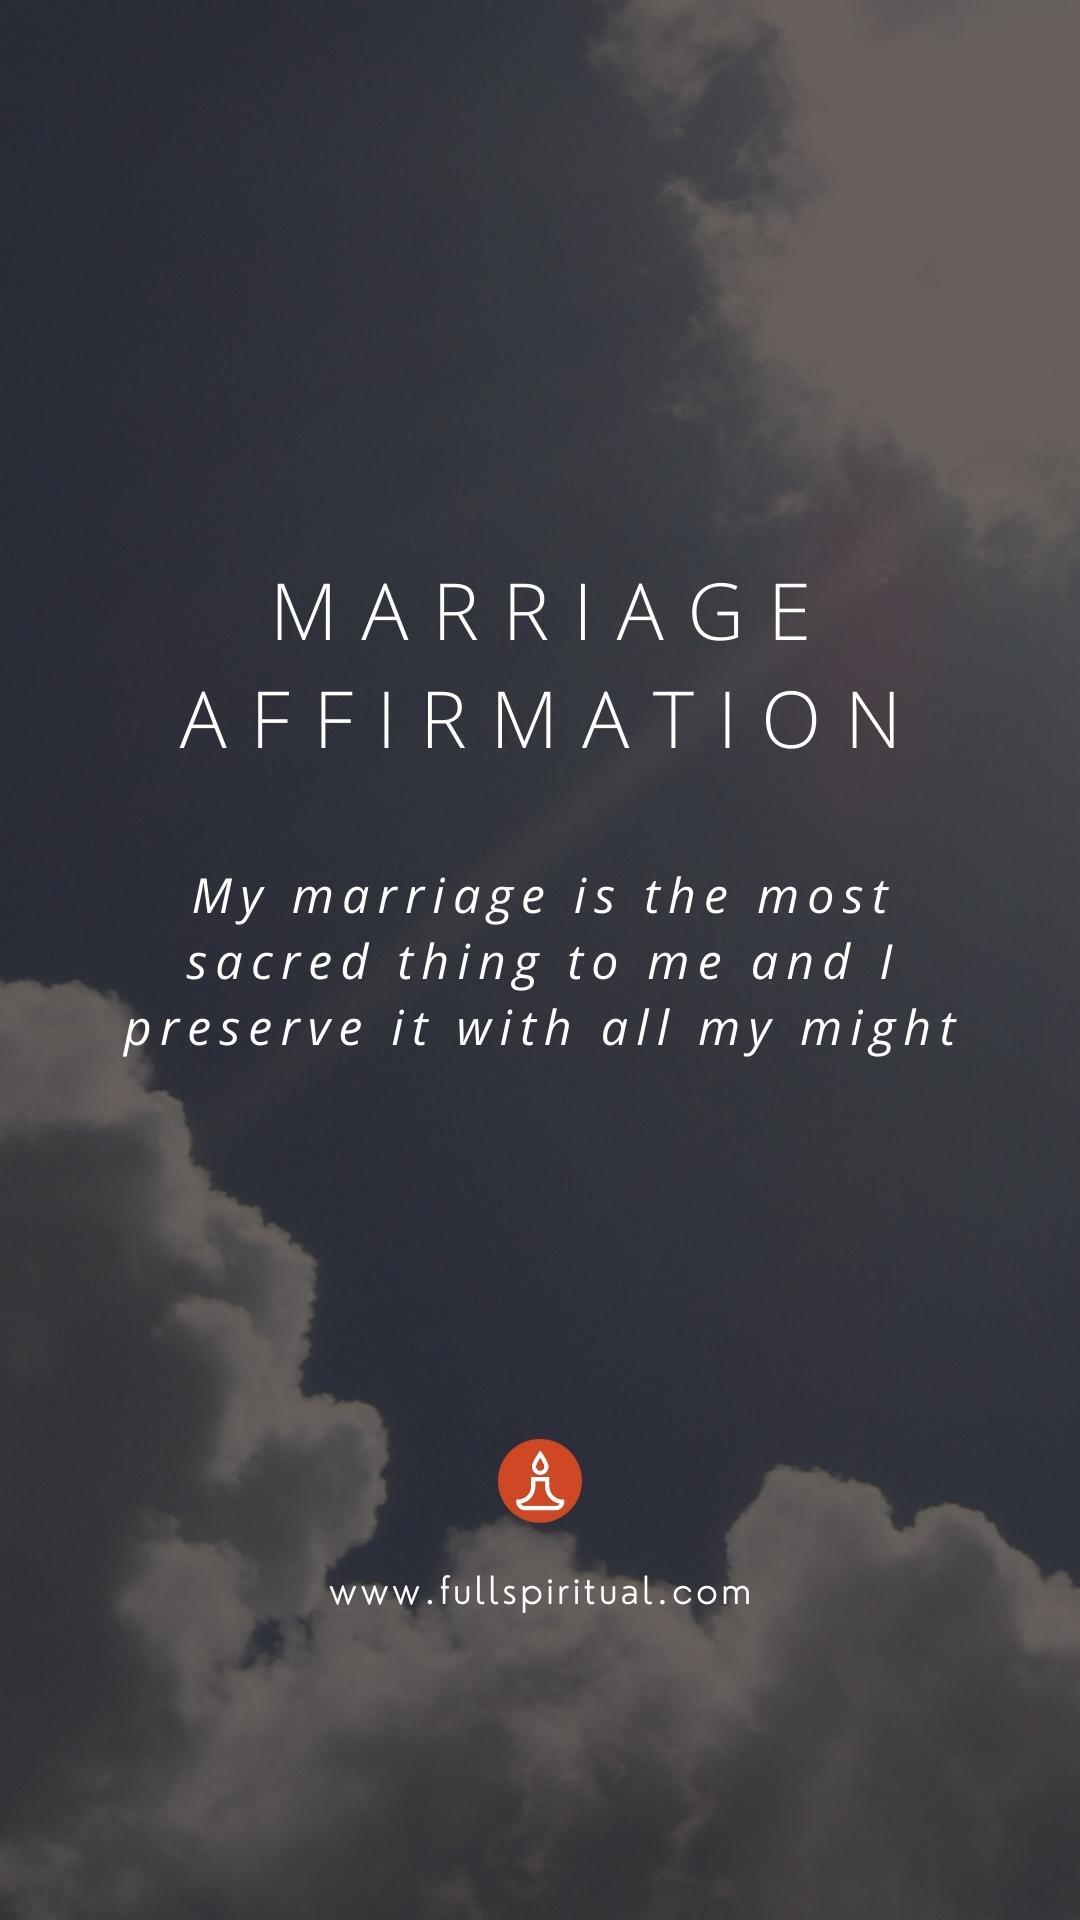 married couple affirmation